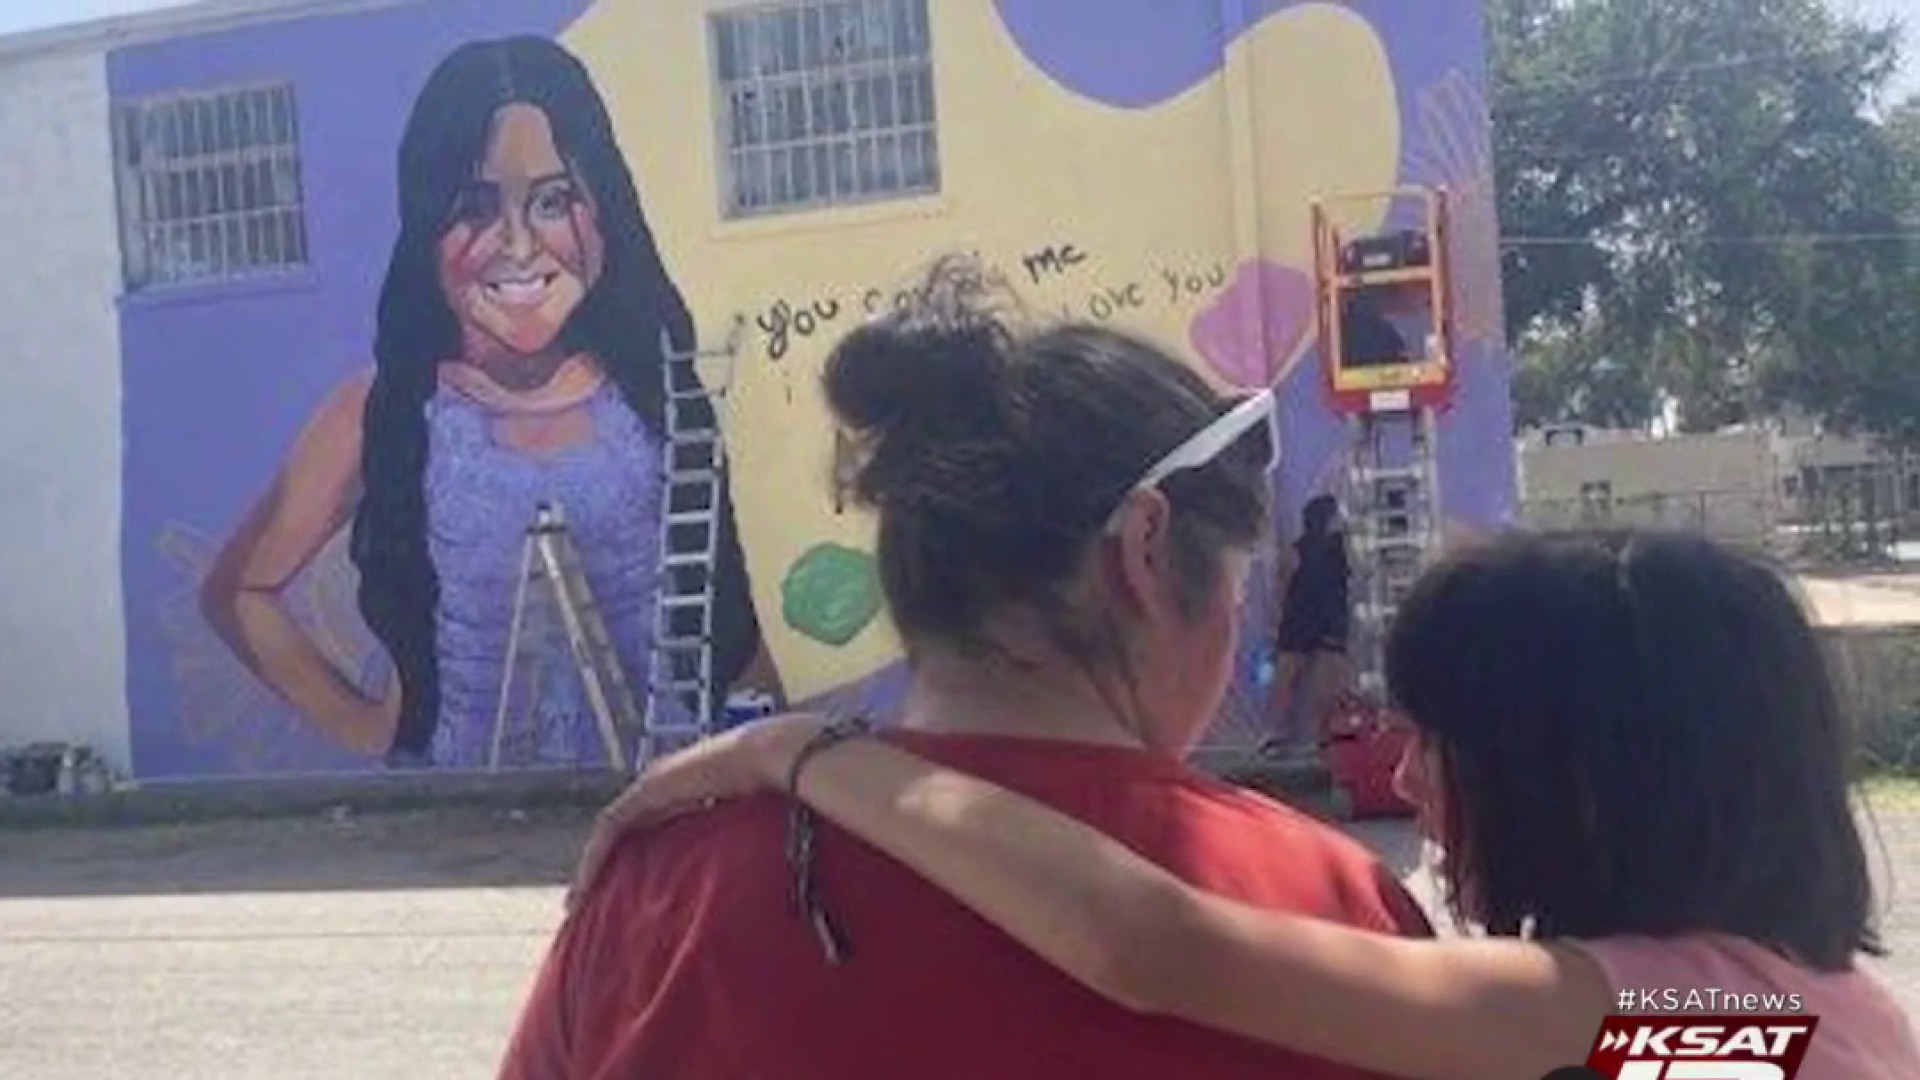 Uvalde shooting victims memorialized in town murals - The